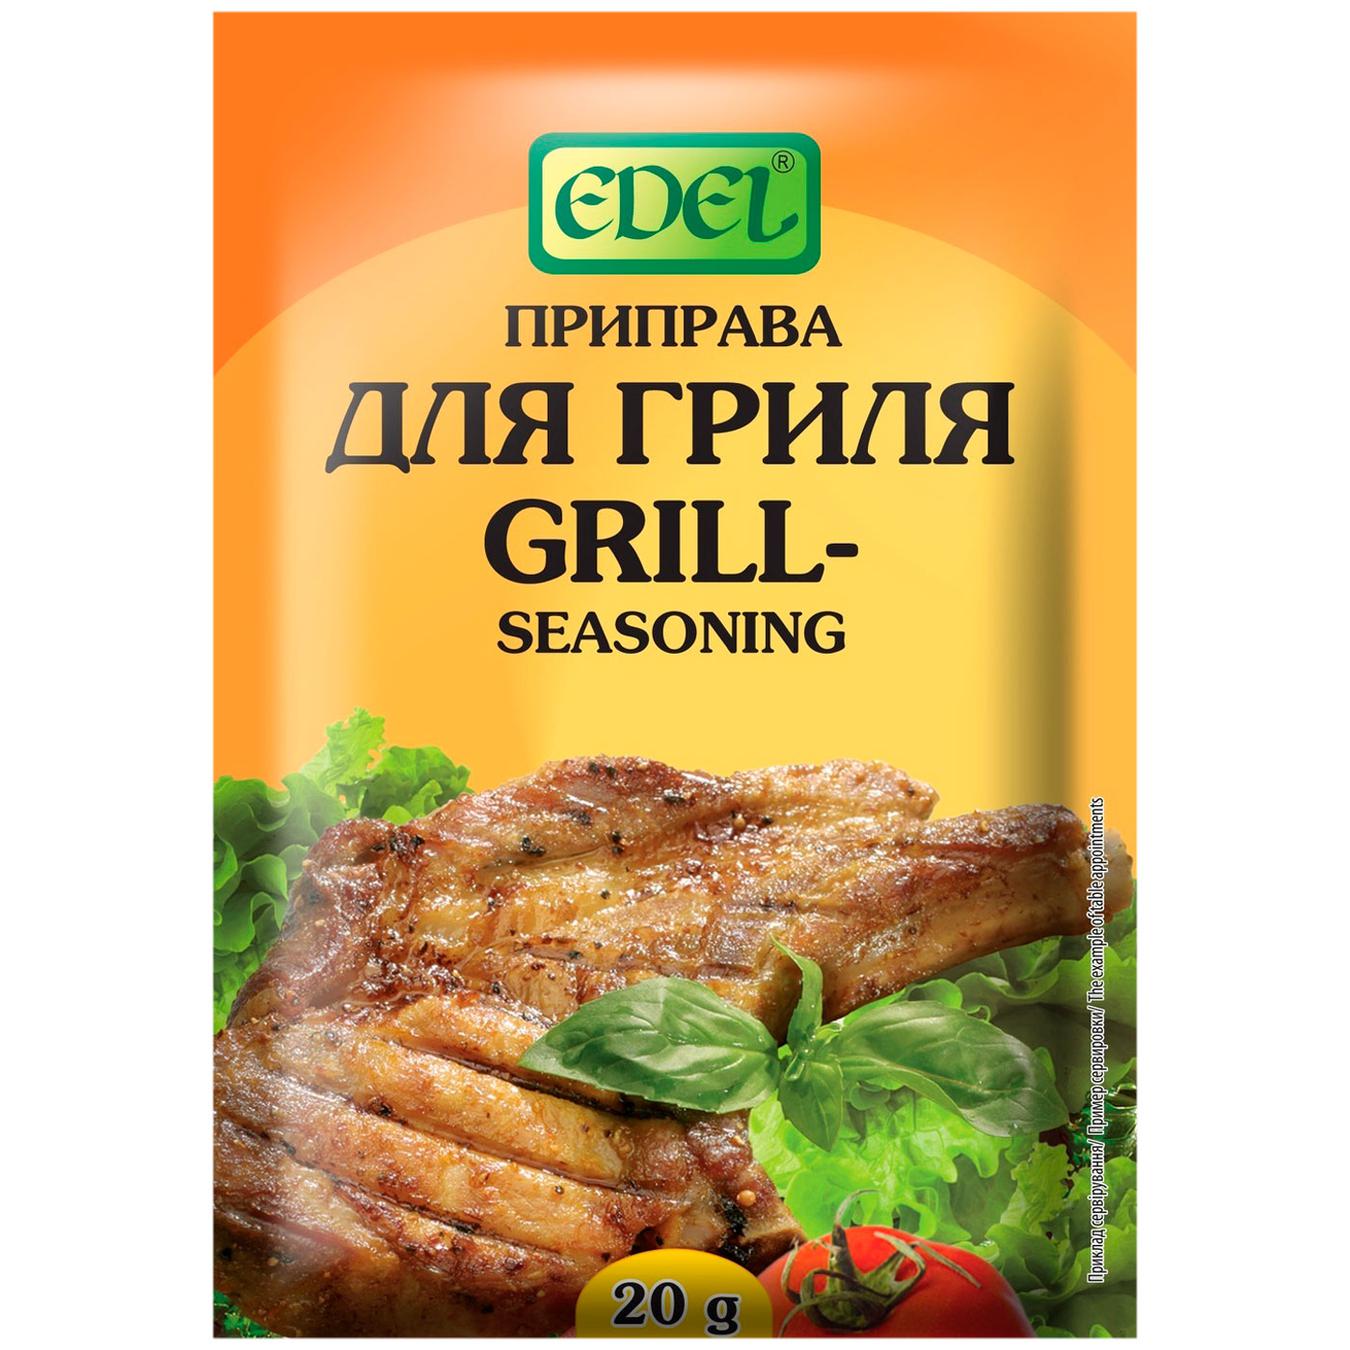 EDEL for grill spices 20g